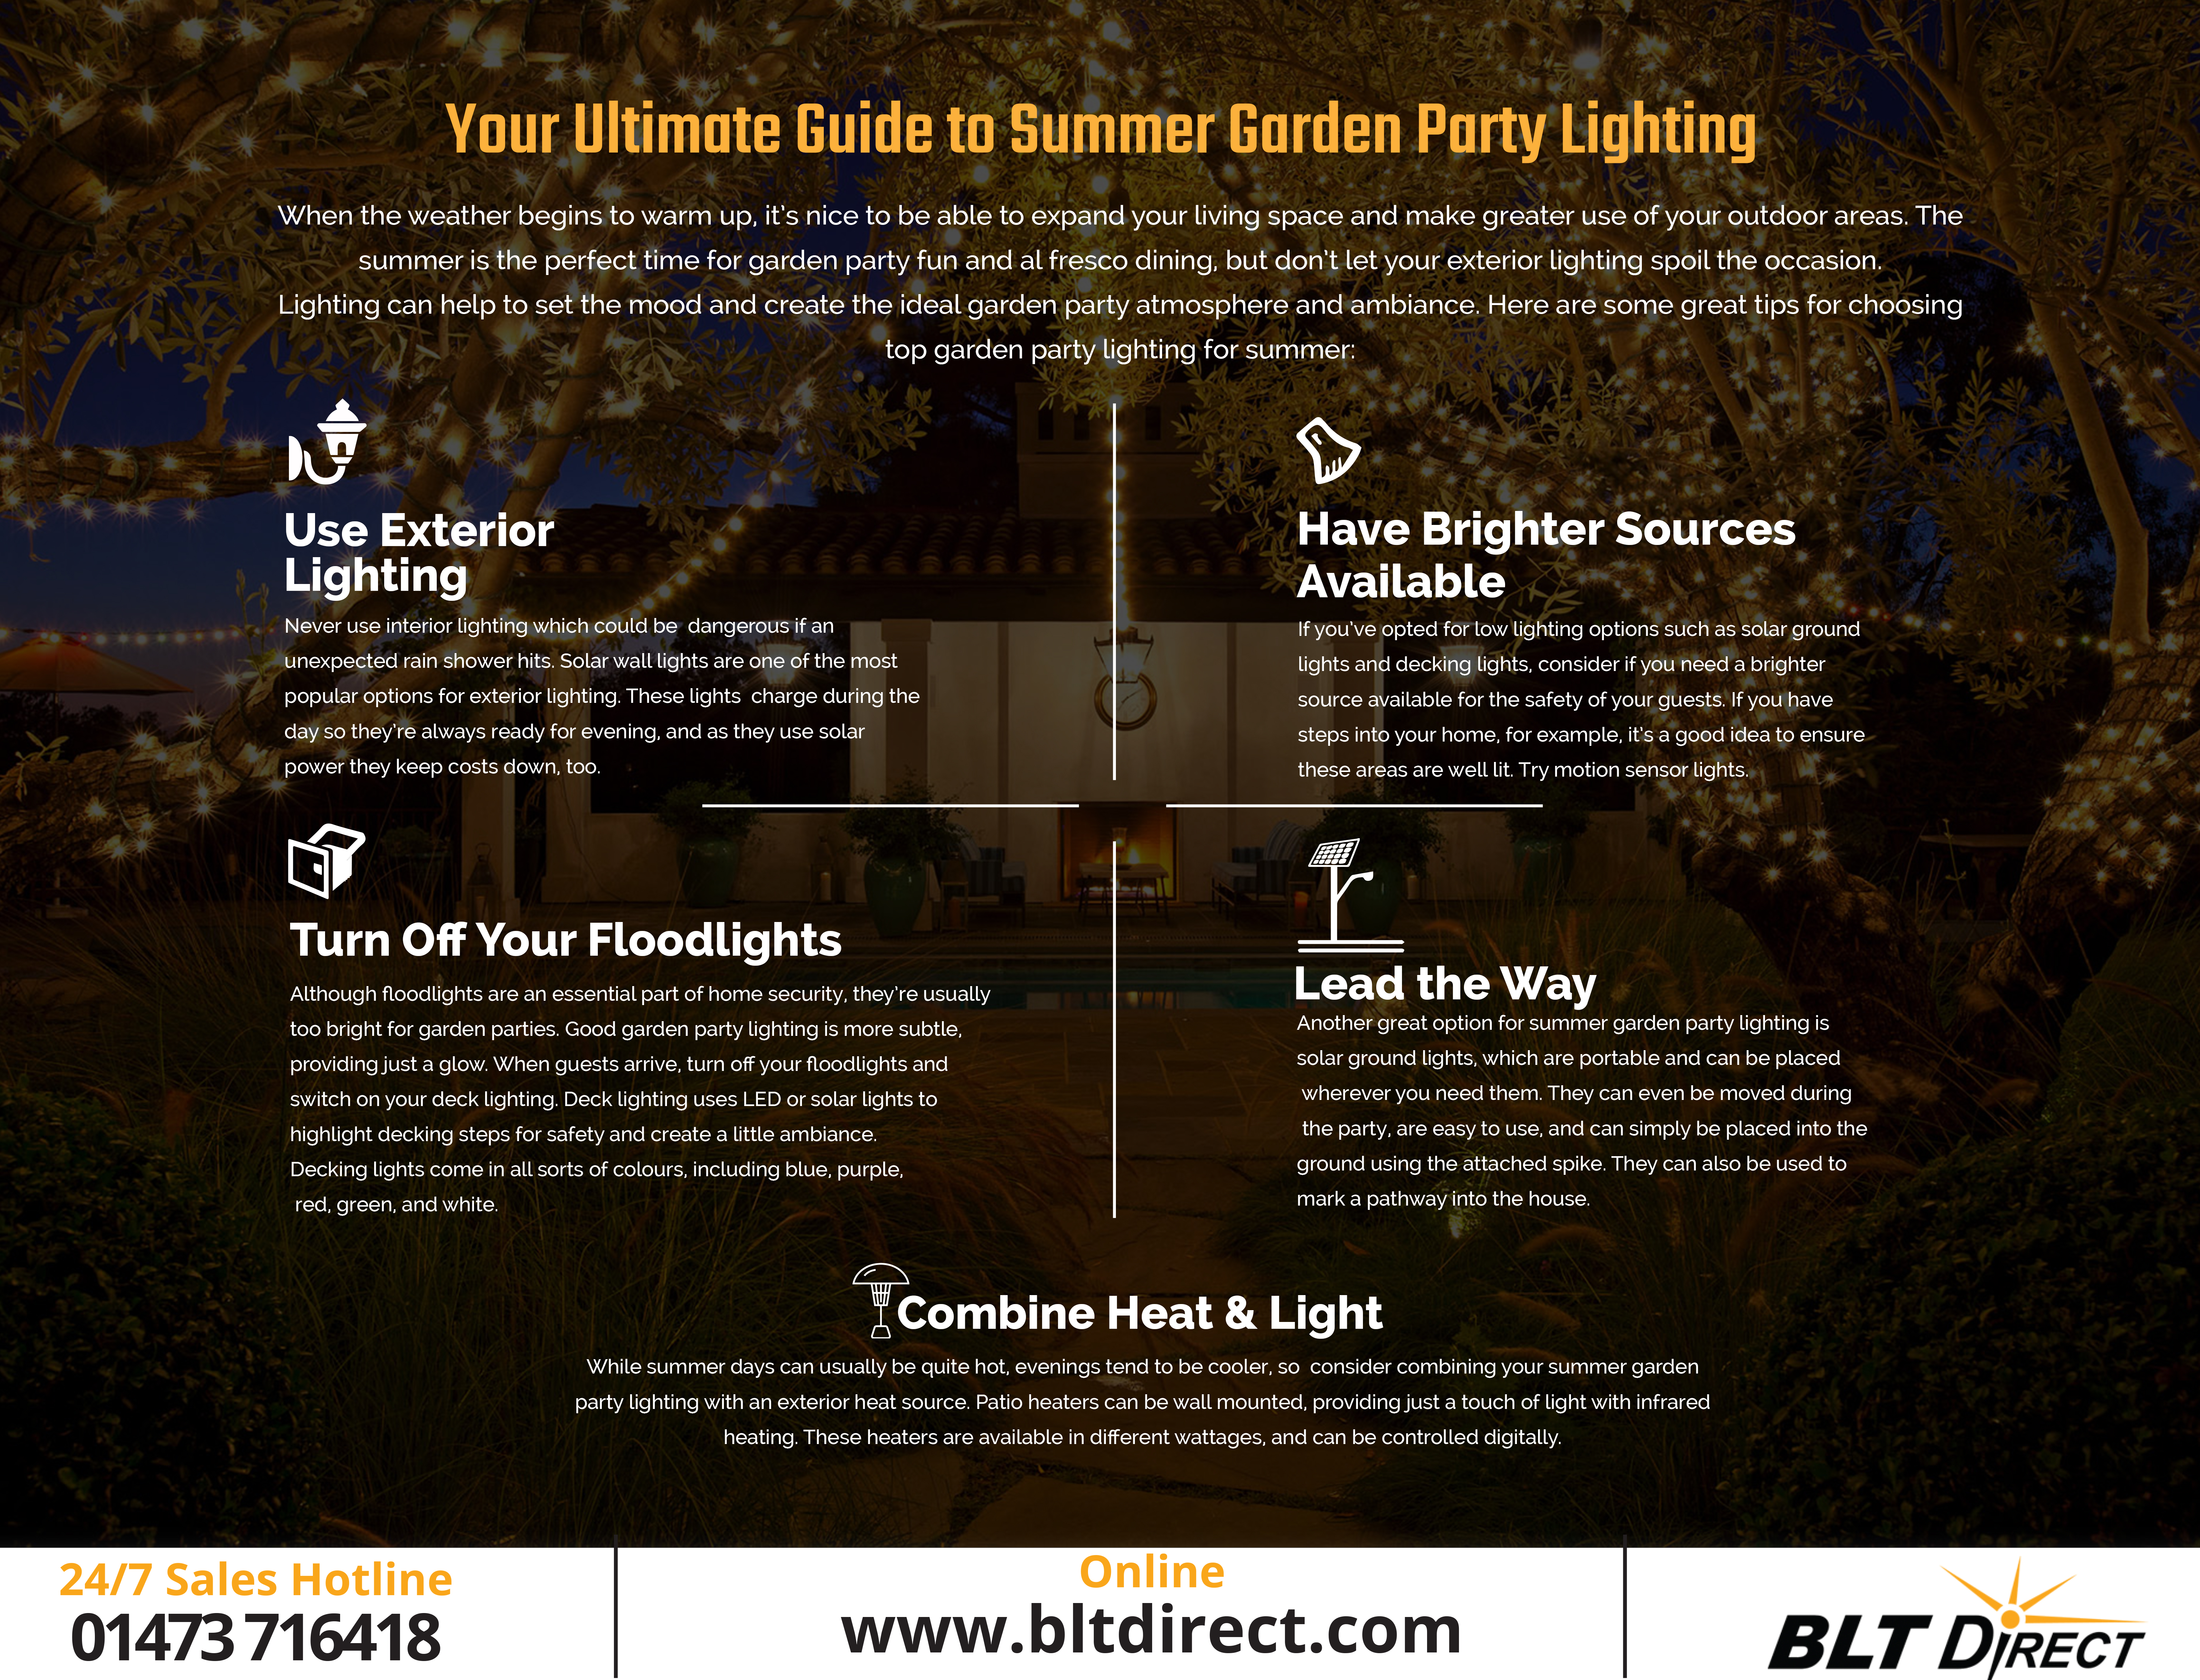 Ultimate Guide to Summer Garden Party Lighting Infographic